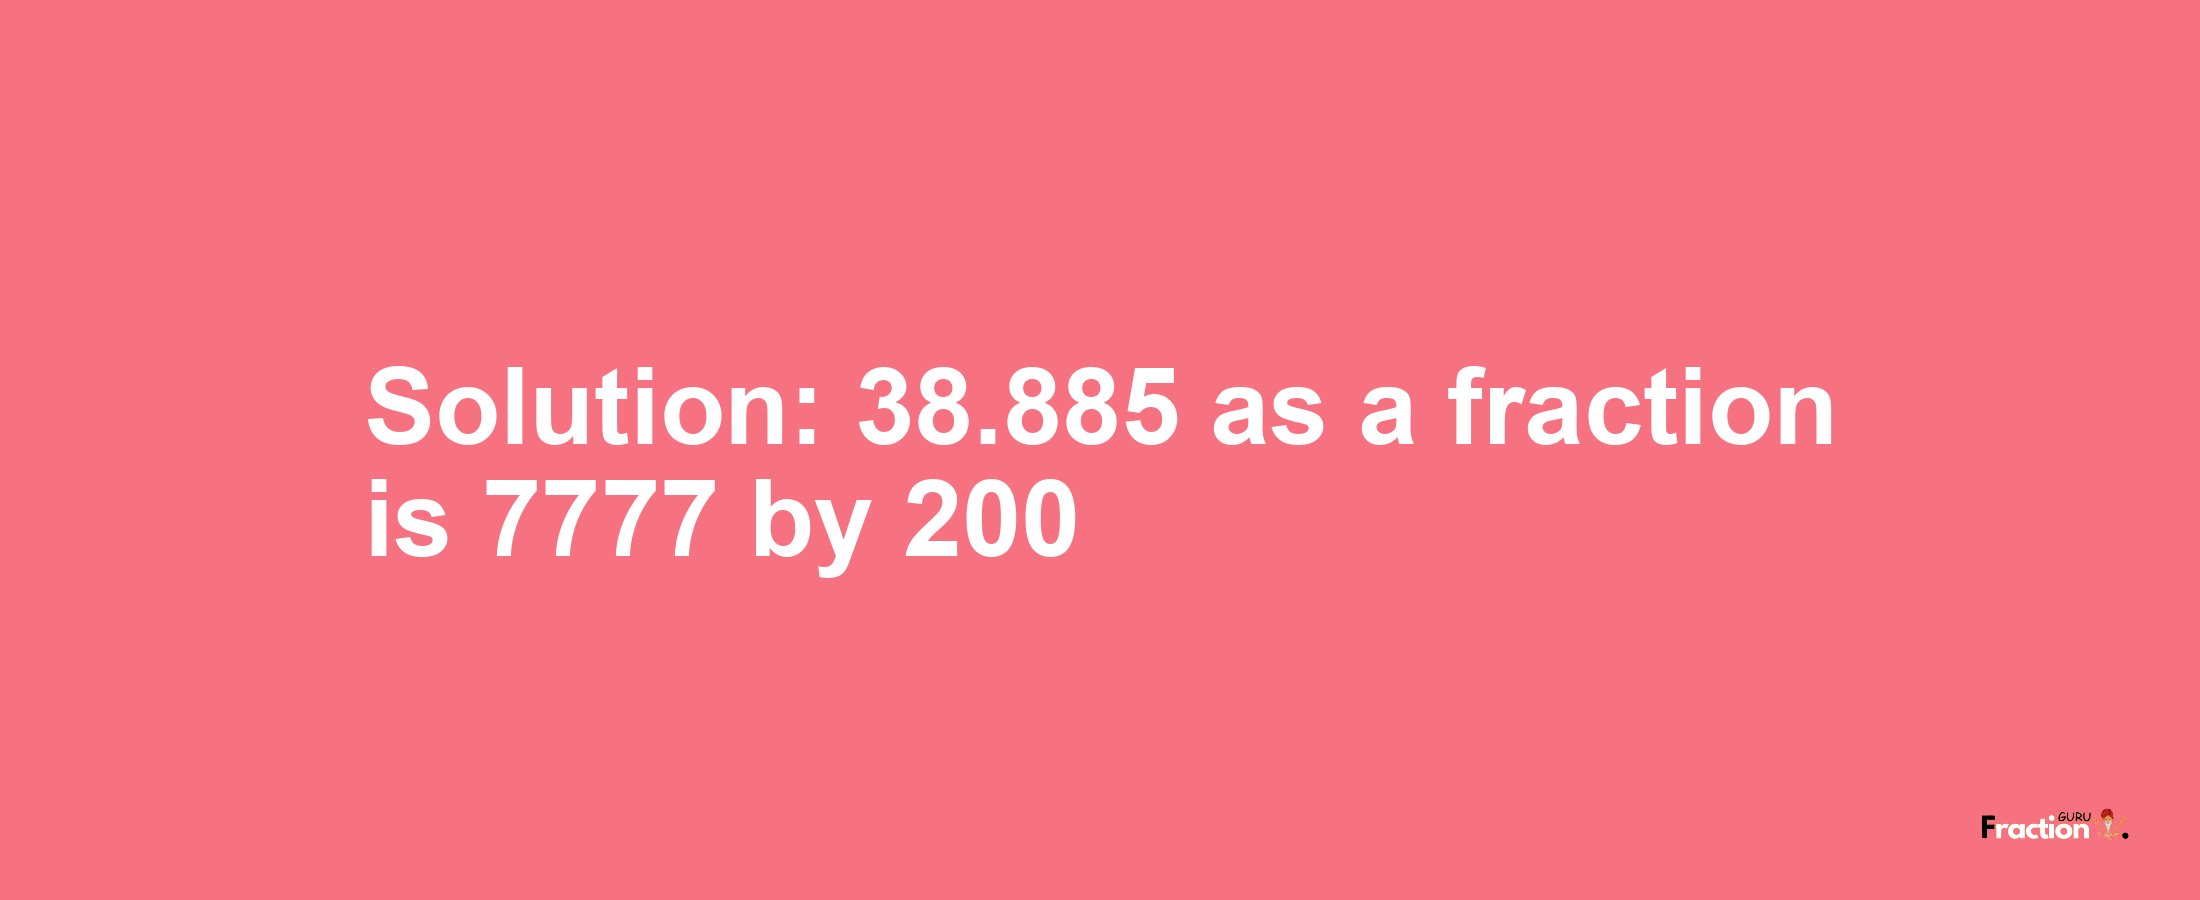 Solution:38.885 as a fraction is 7777/200